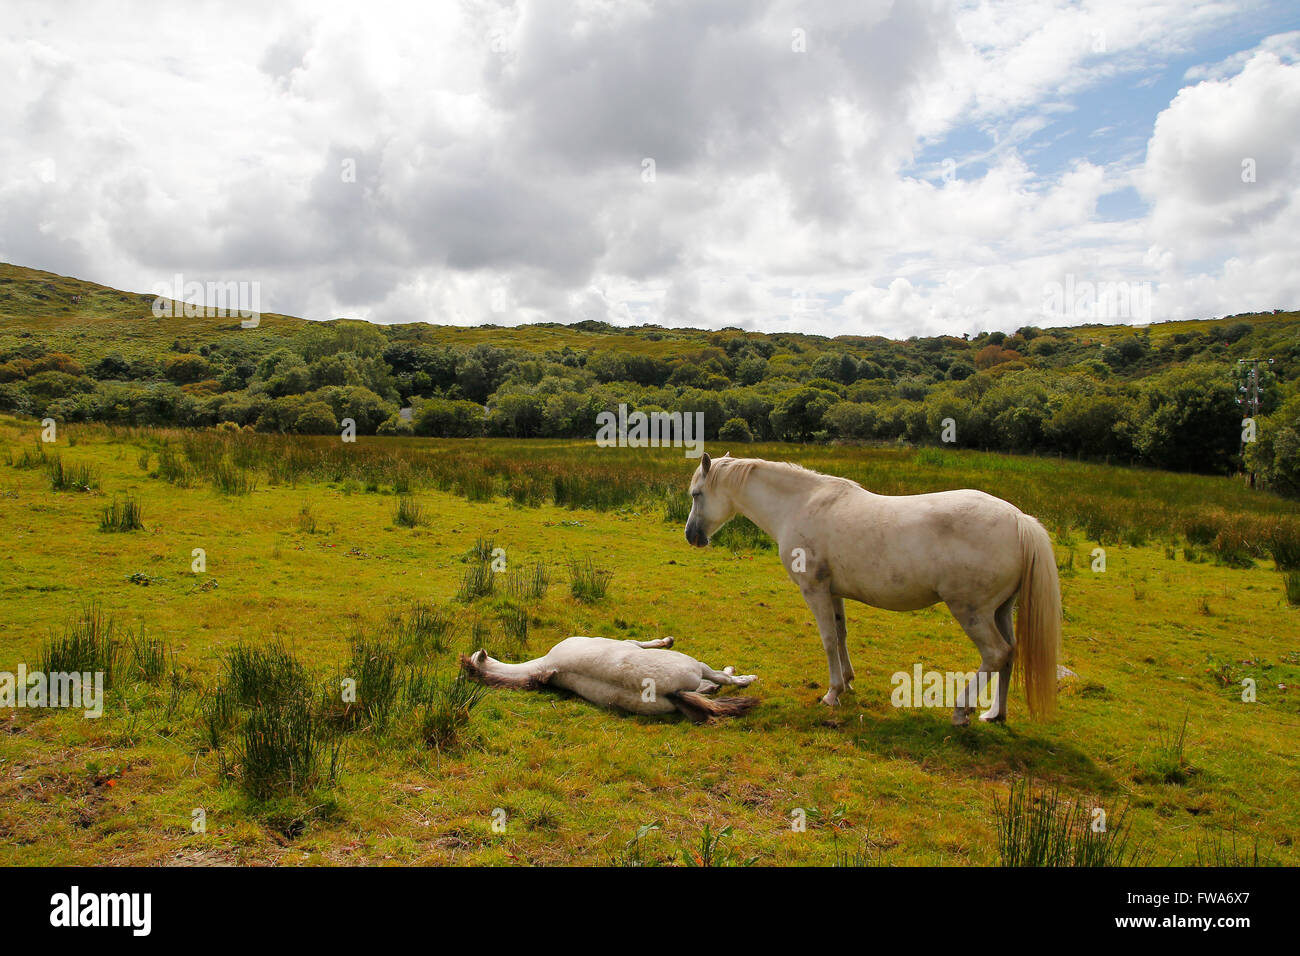 Two white horses in the wild, in Ireland Stock Photo